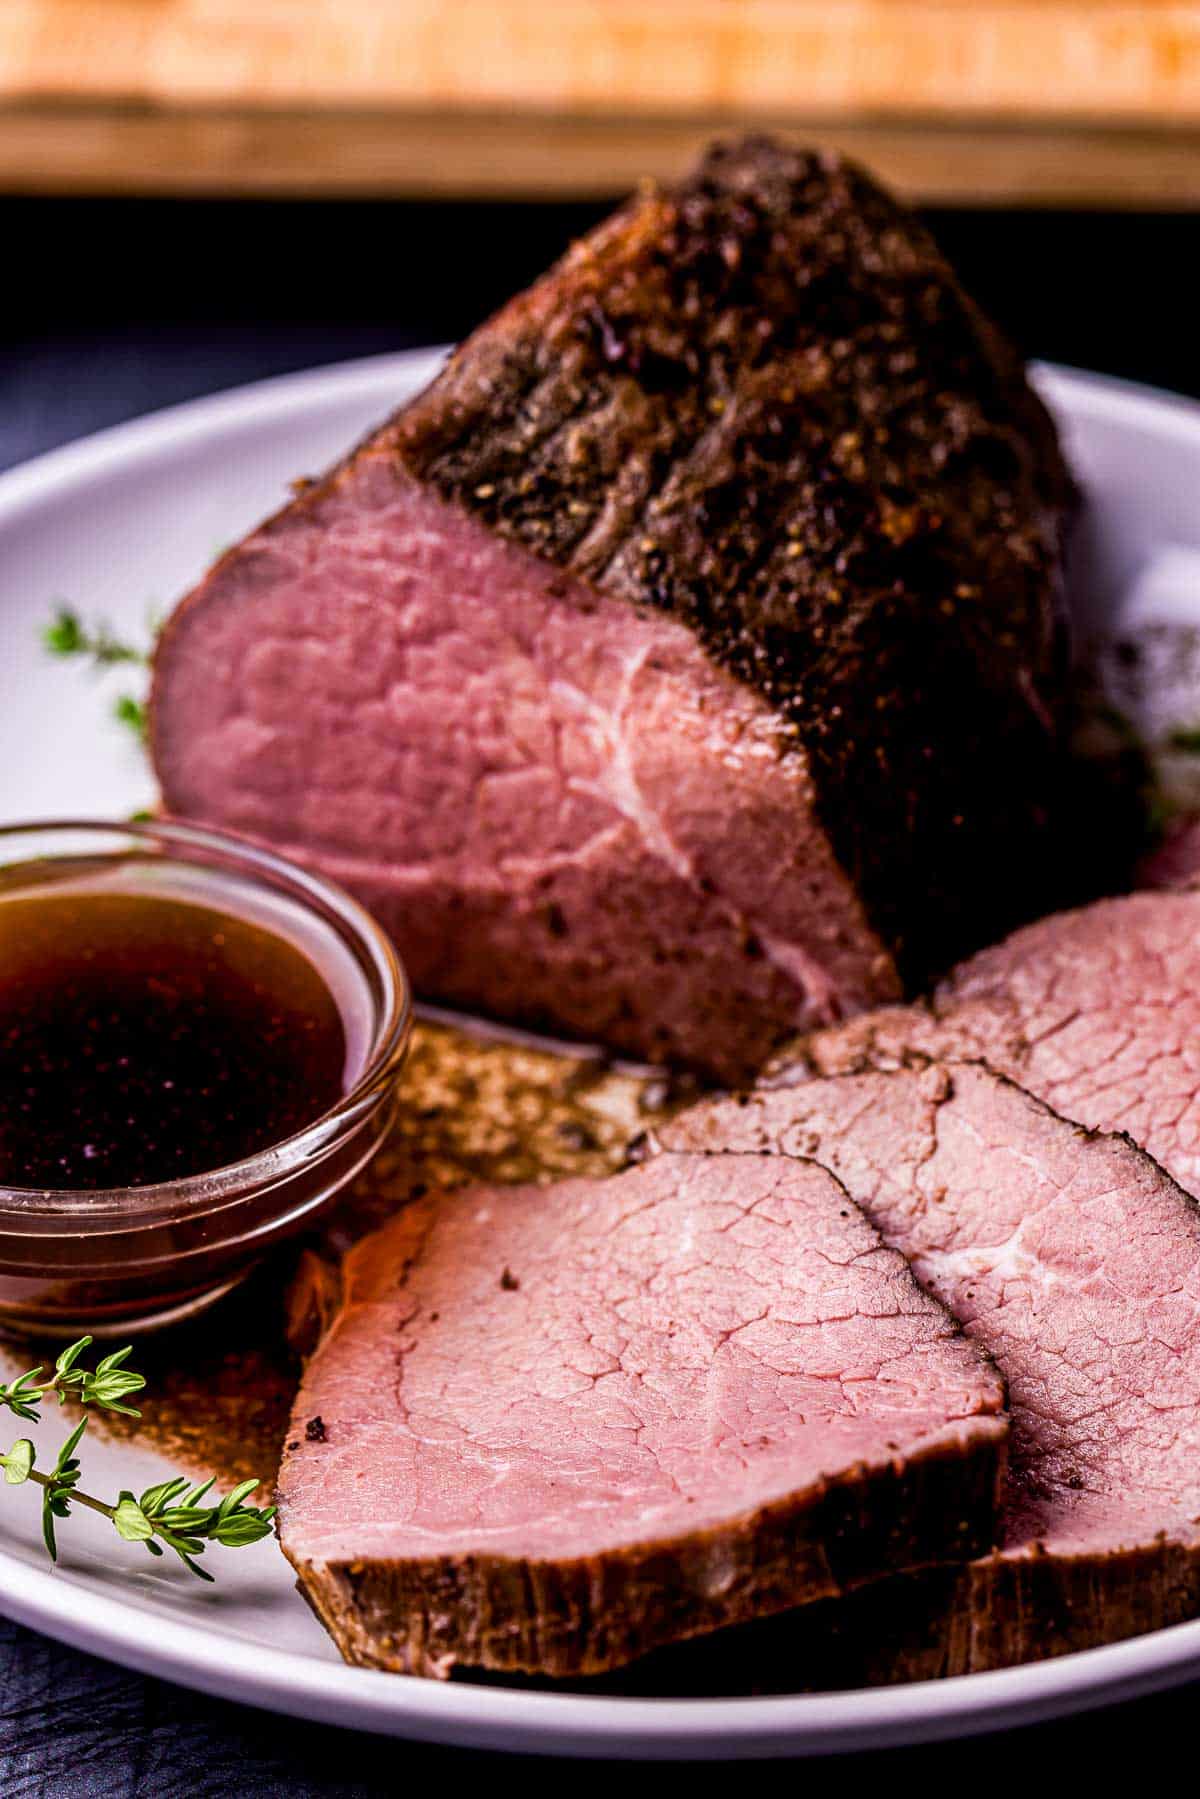 pieces of roast beef on a plate drizzle with liquid and bowl of brown jus on the side